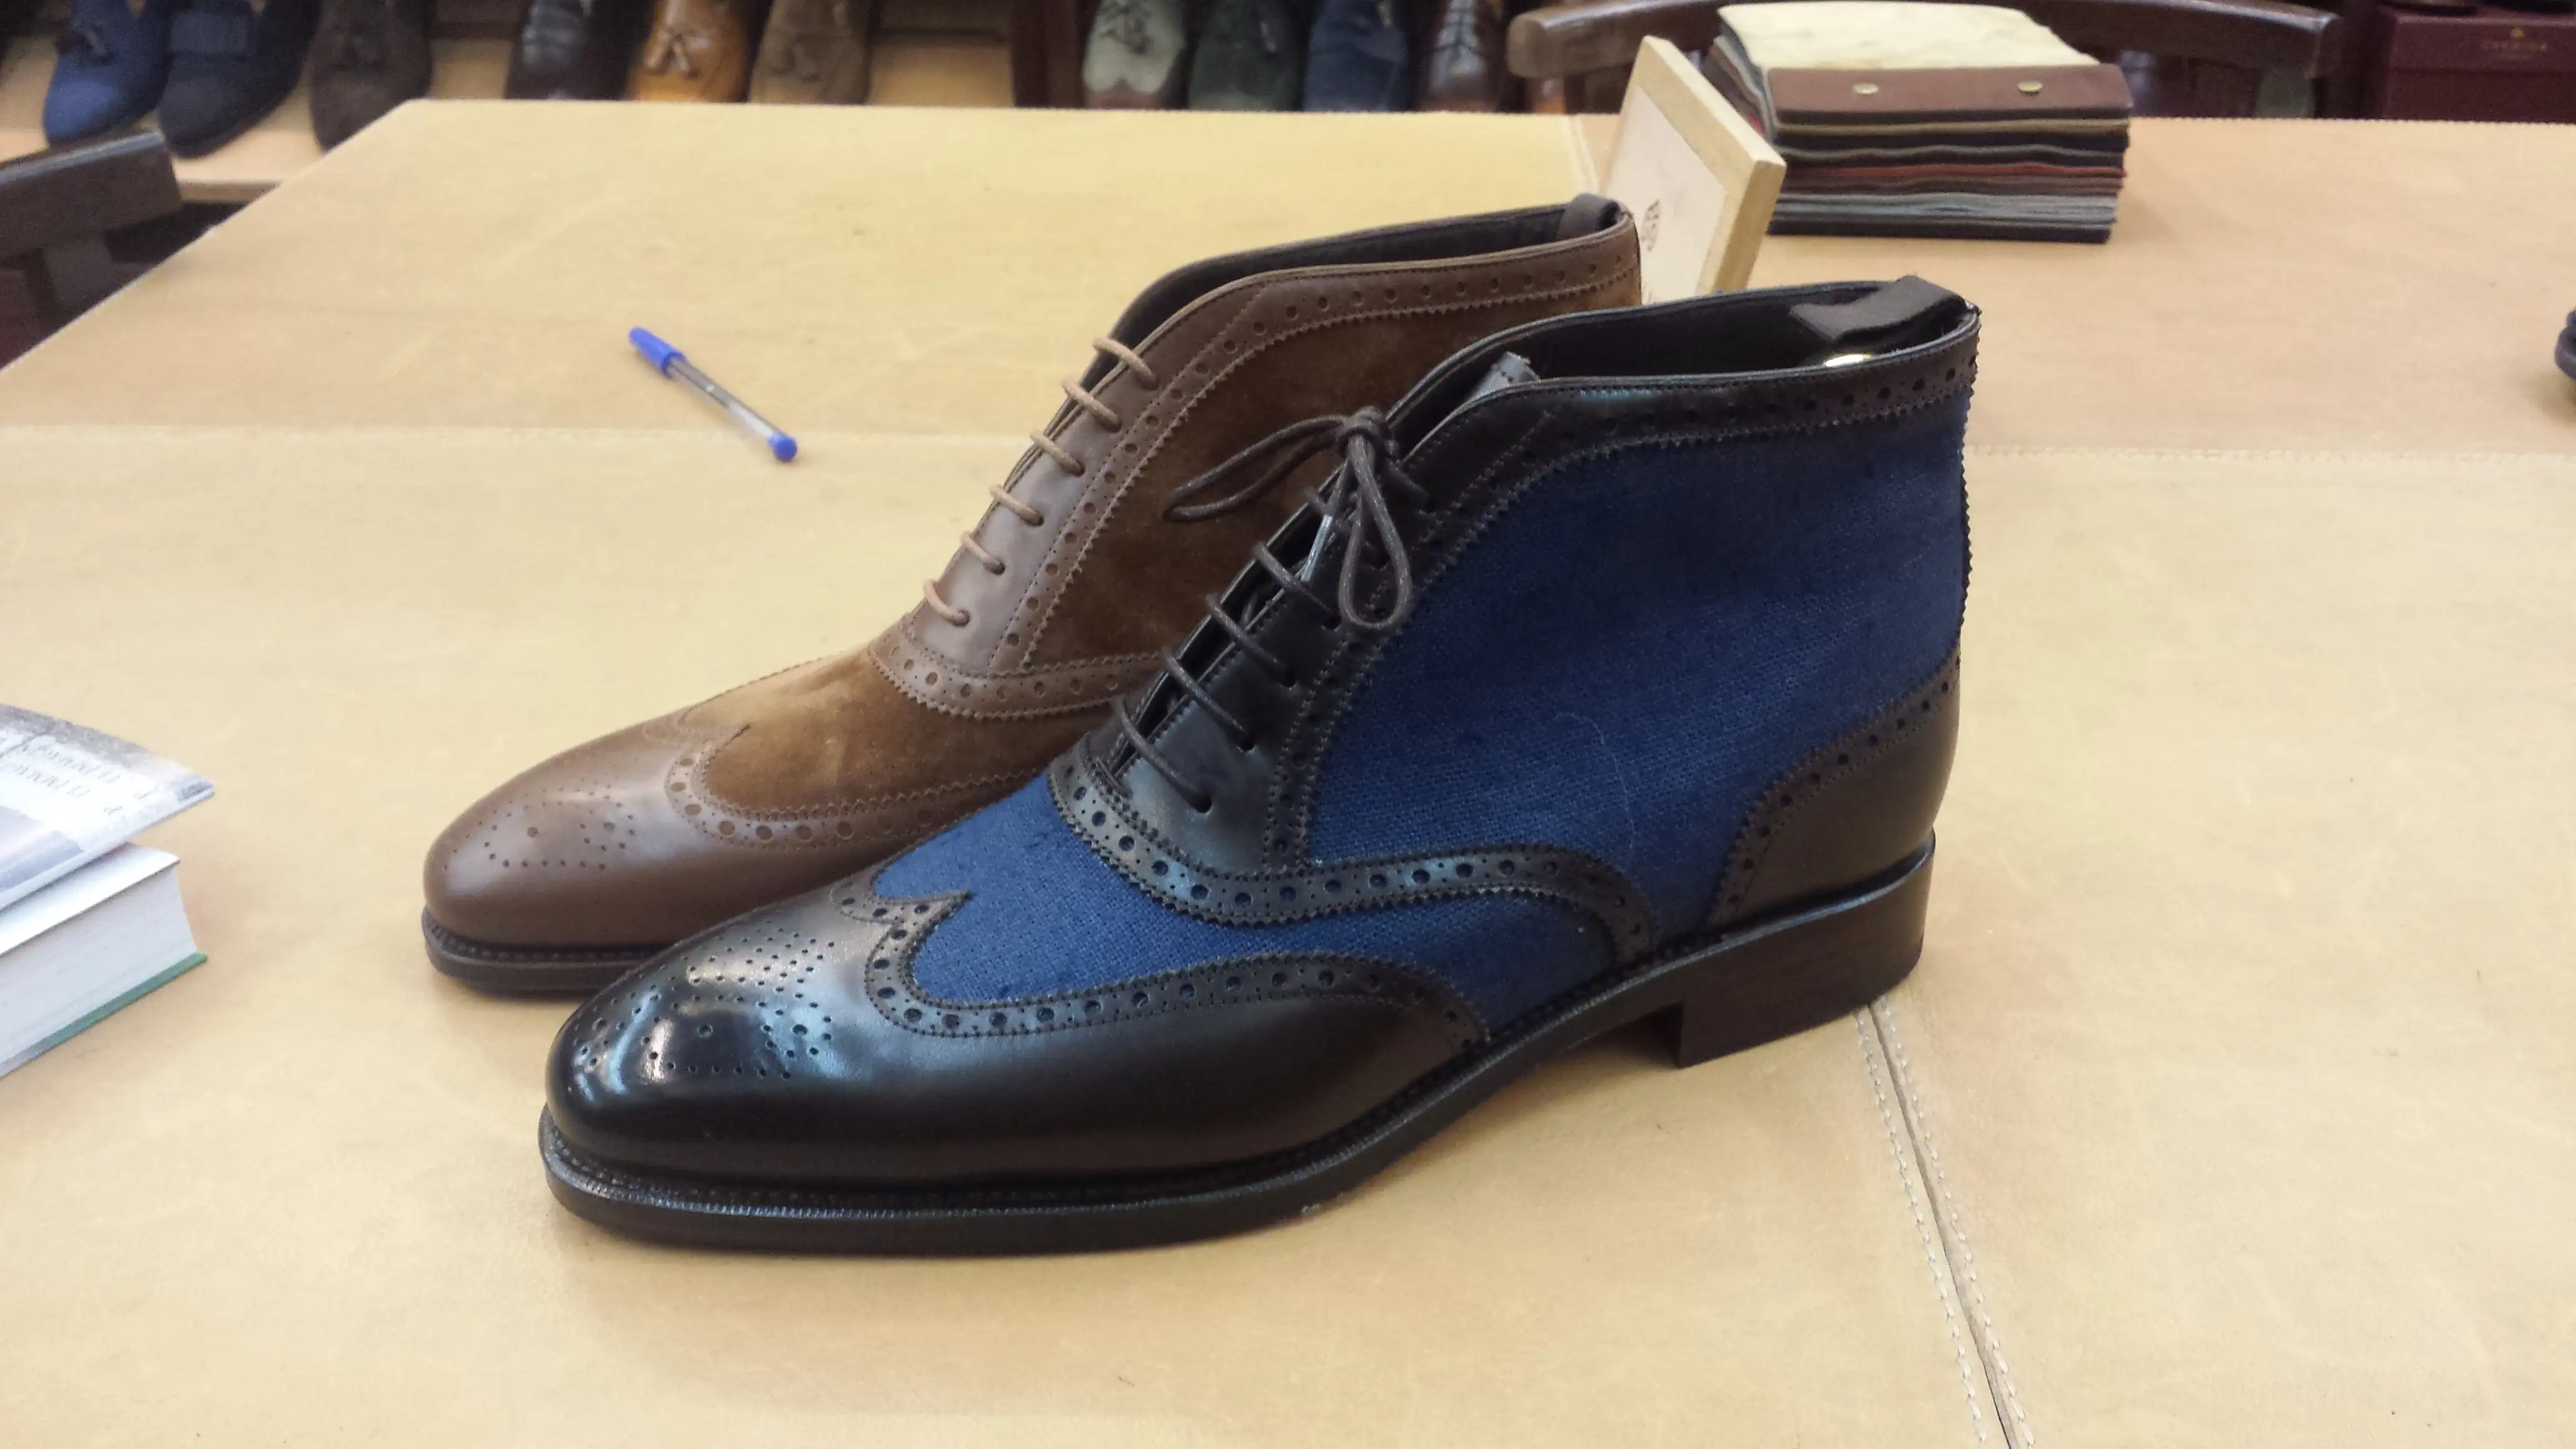 Some new boots of Carmina for next fall